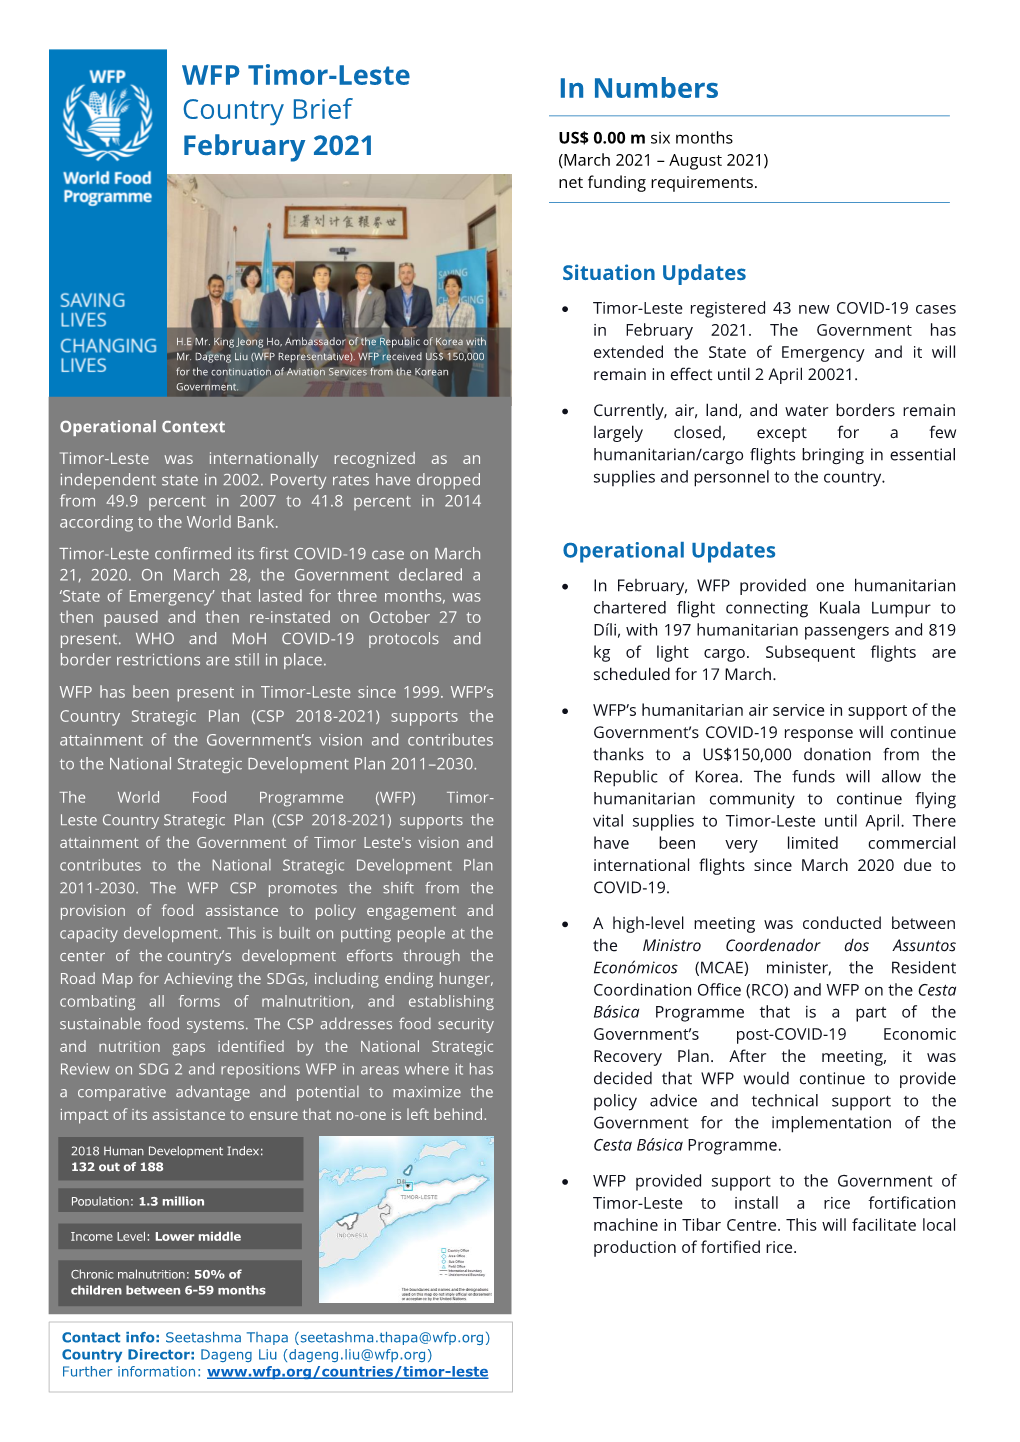 WFP Timor-Leste Country Brief February 2021 in Numbers